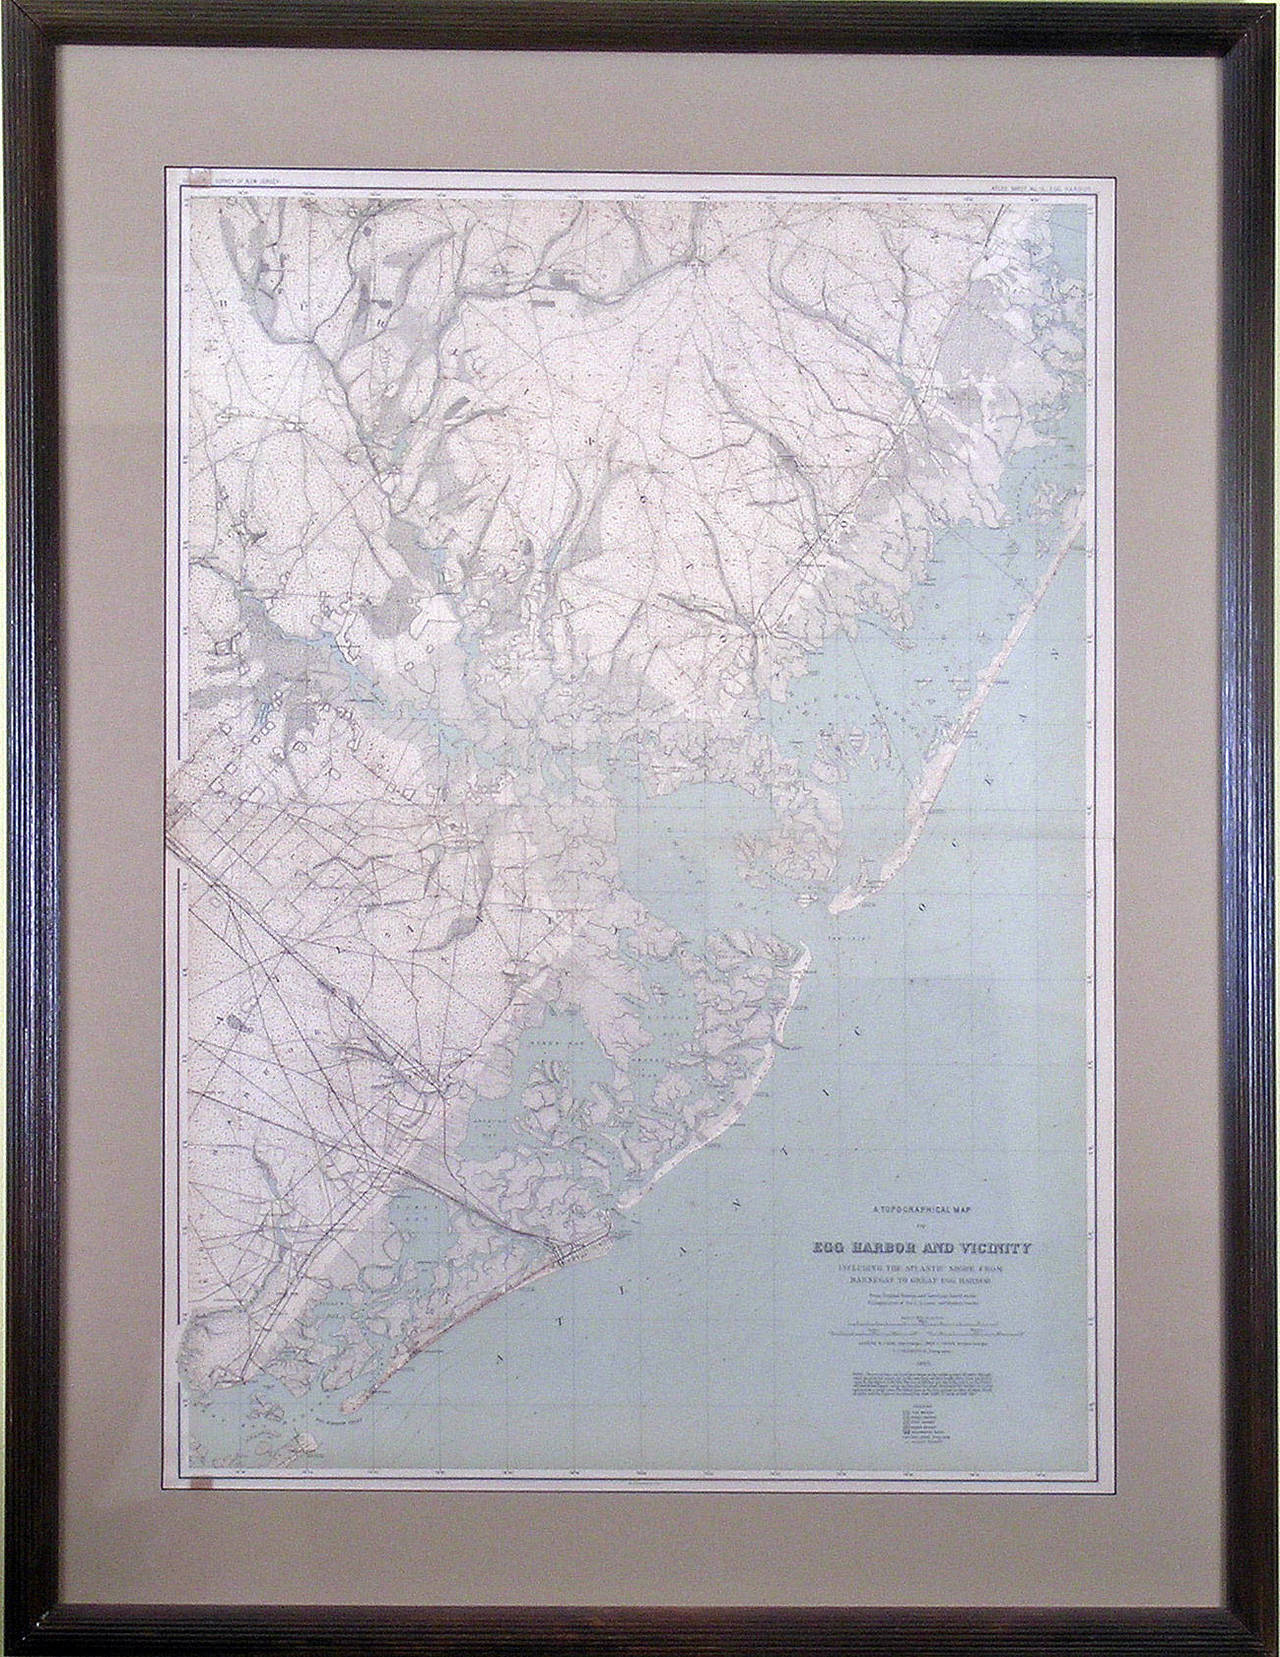 Egg Harbor and Vicinity (New Jersey) - Print by Julius Bien